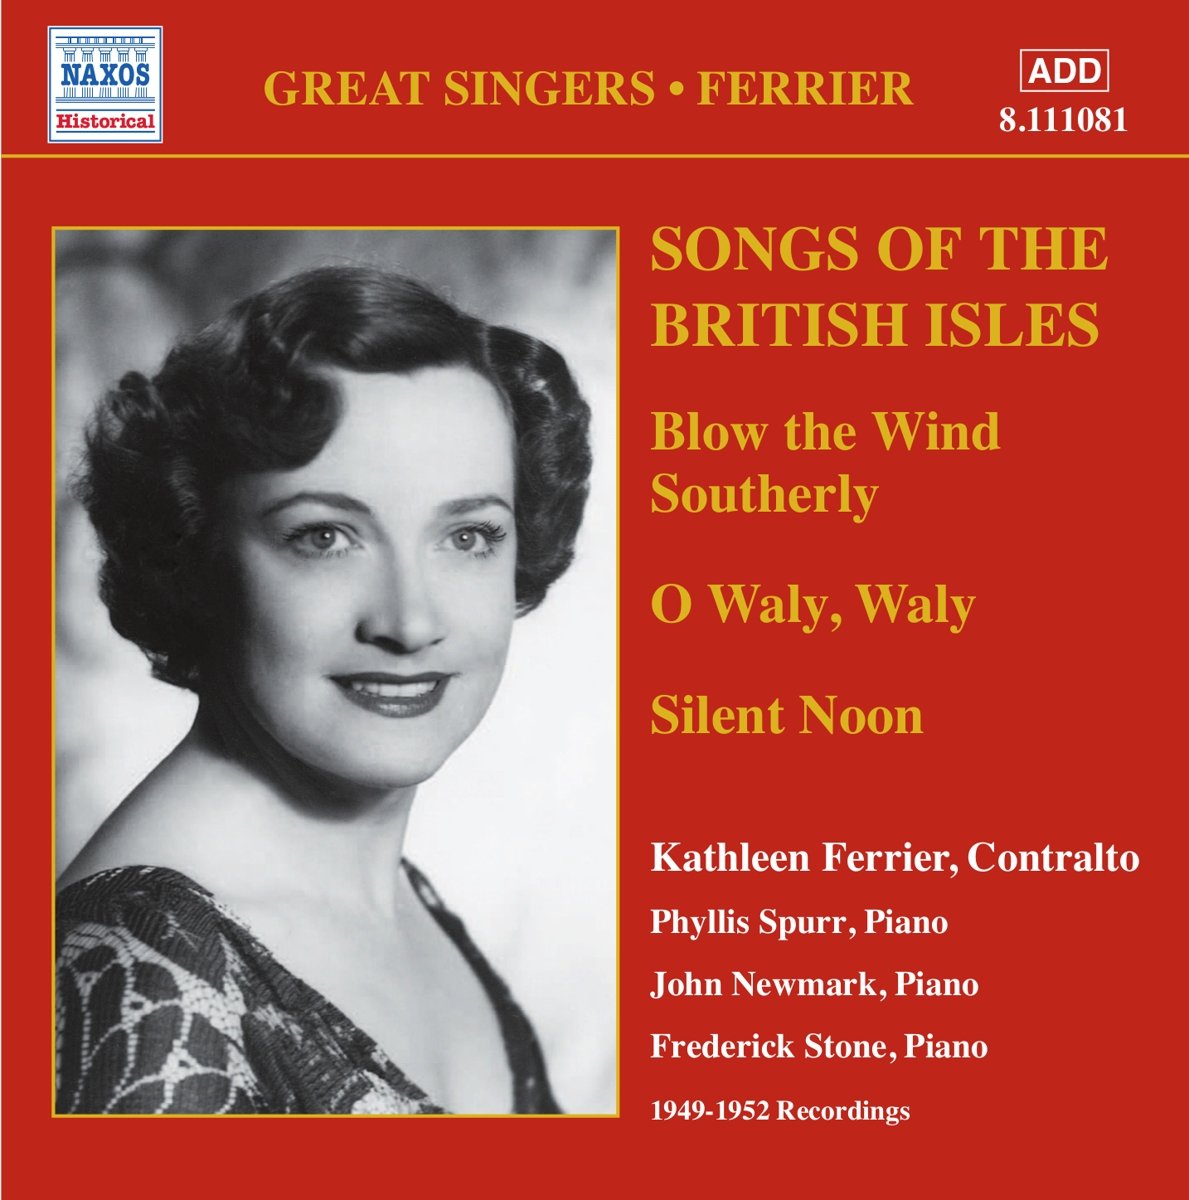 (Great Singers - Ferrier) Songs of the British Isles